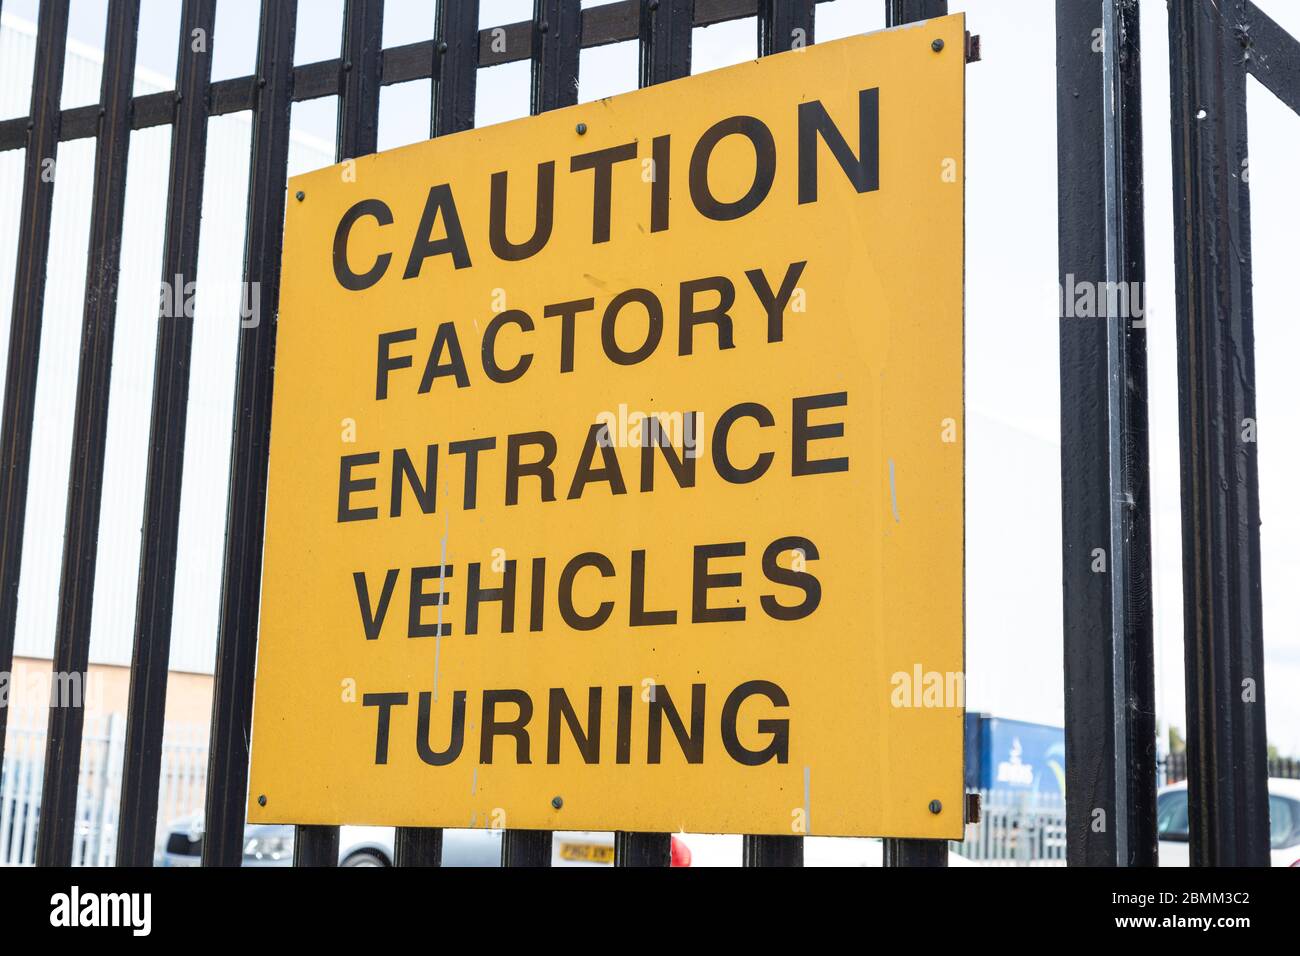 Sign warning of turning factory in vehicles Wallasey Wirral August 2019 Stock Photo